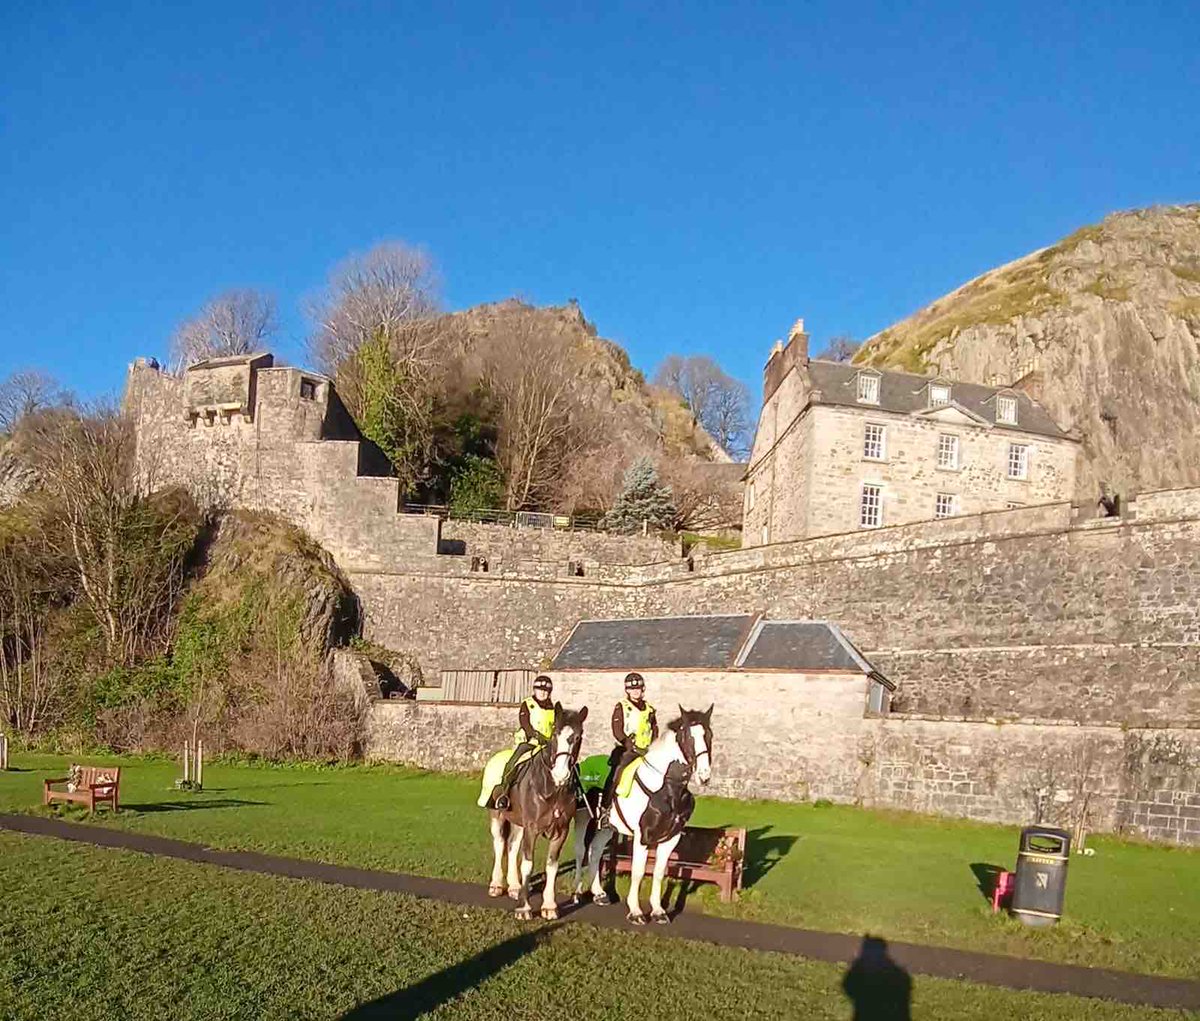 PH Cupar and Dyce paid a visit to Dumbarton Castle while out on patrol today where the sun was shining. #CrispFrostyMornings #WrapUpWarm @PSOSArgWestDunb